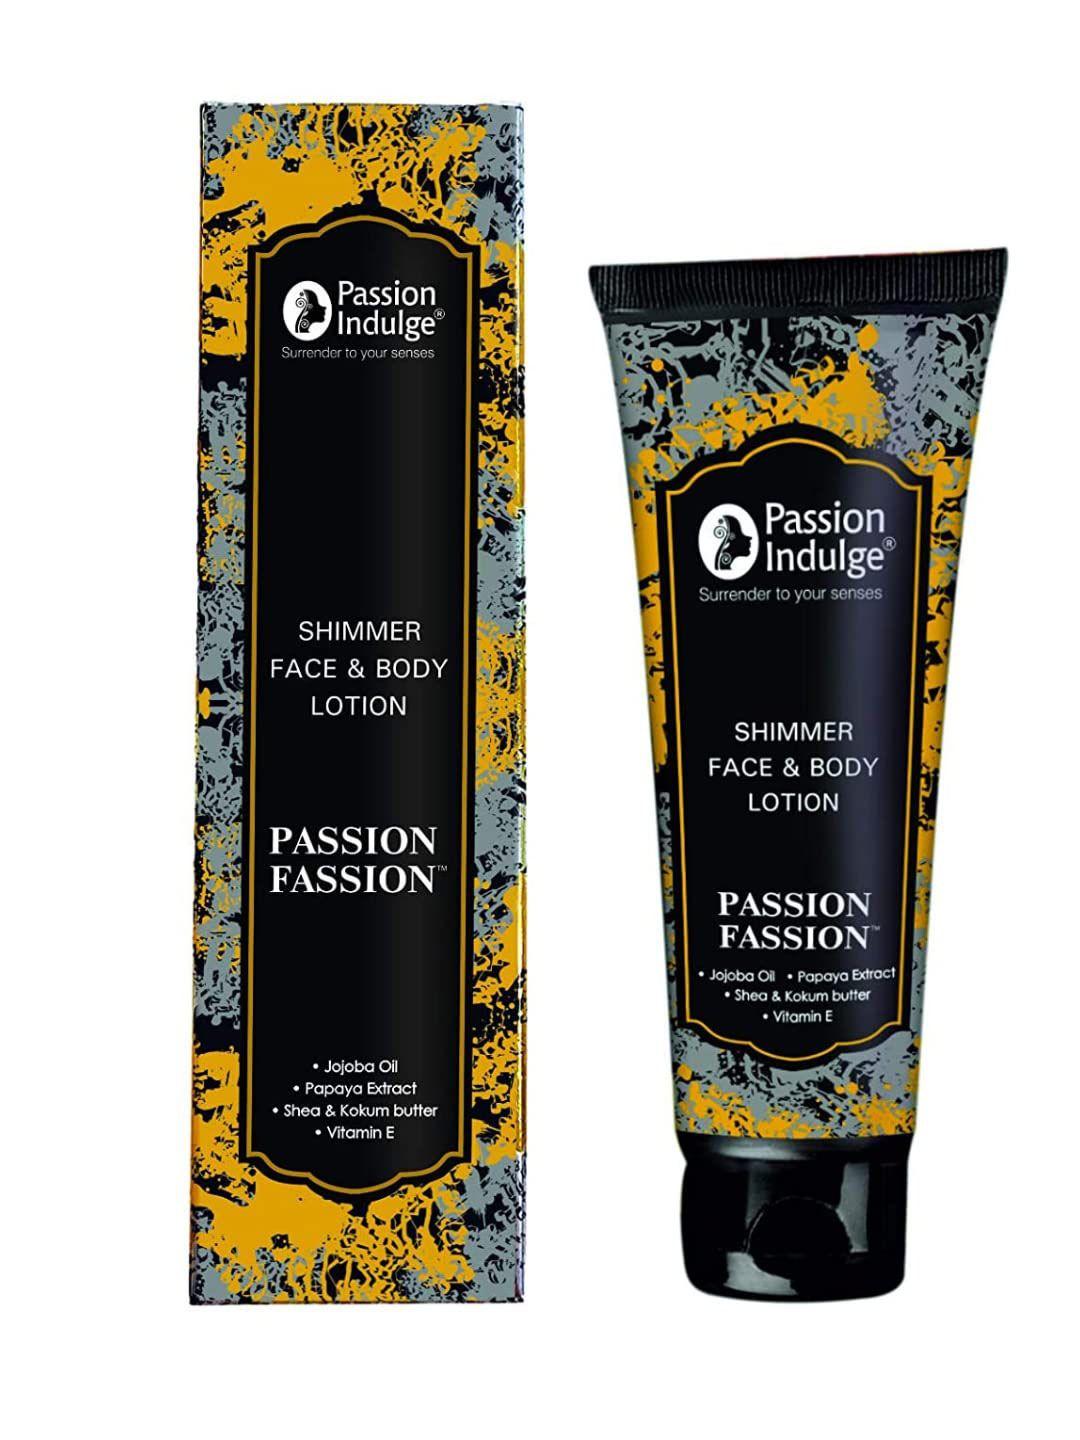 passion indulge passion fassion shimmer face & body lotion with jojoba oil & papaya - 100g